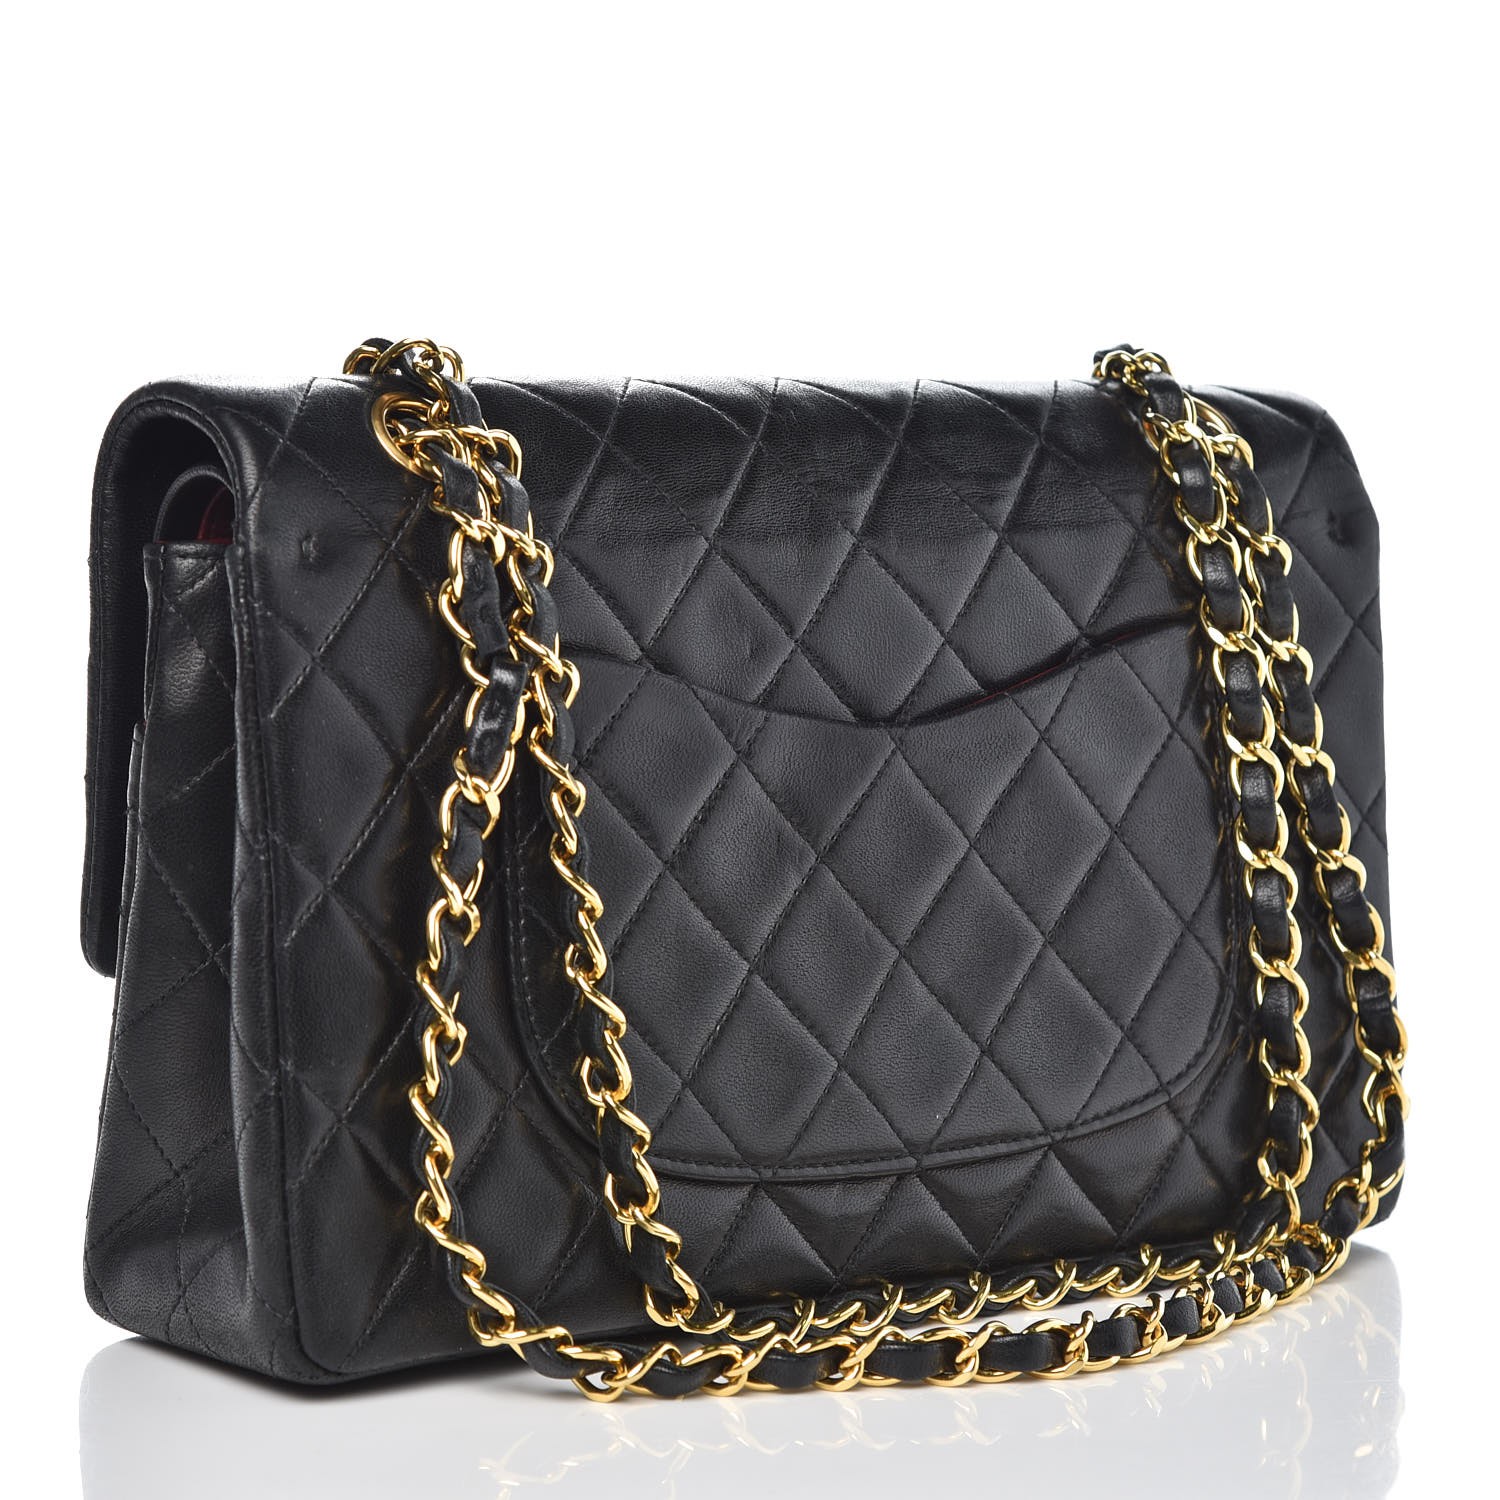 CHANEL Lambskin Quilted Medium Double Flap Bag Black 343378